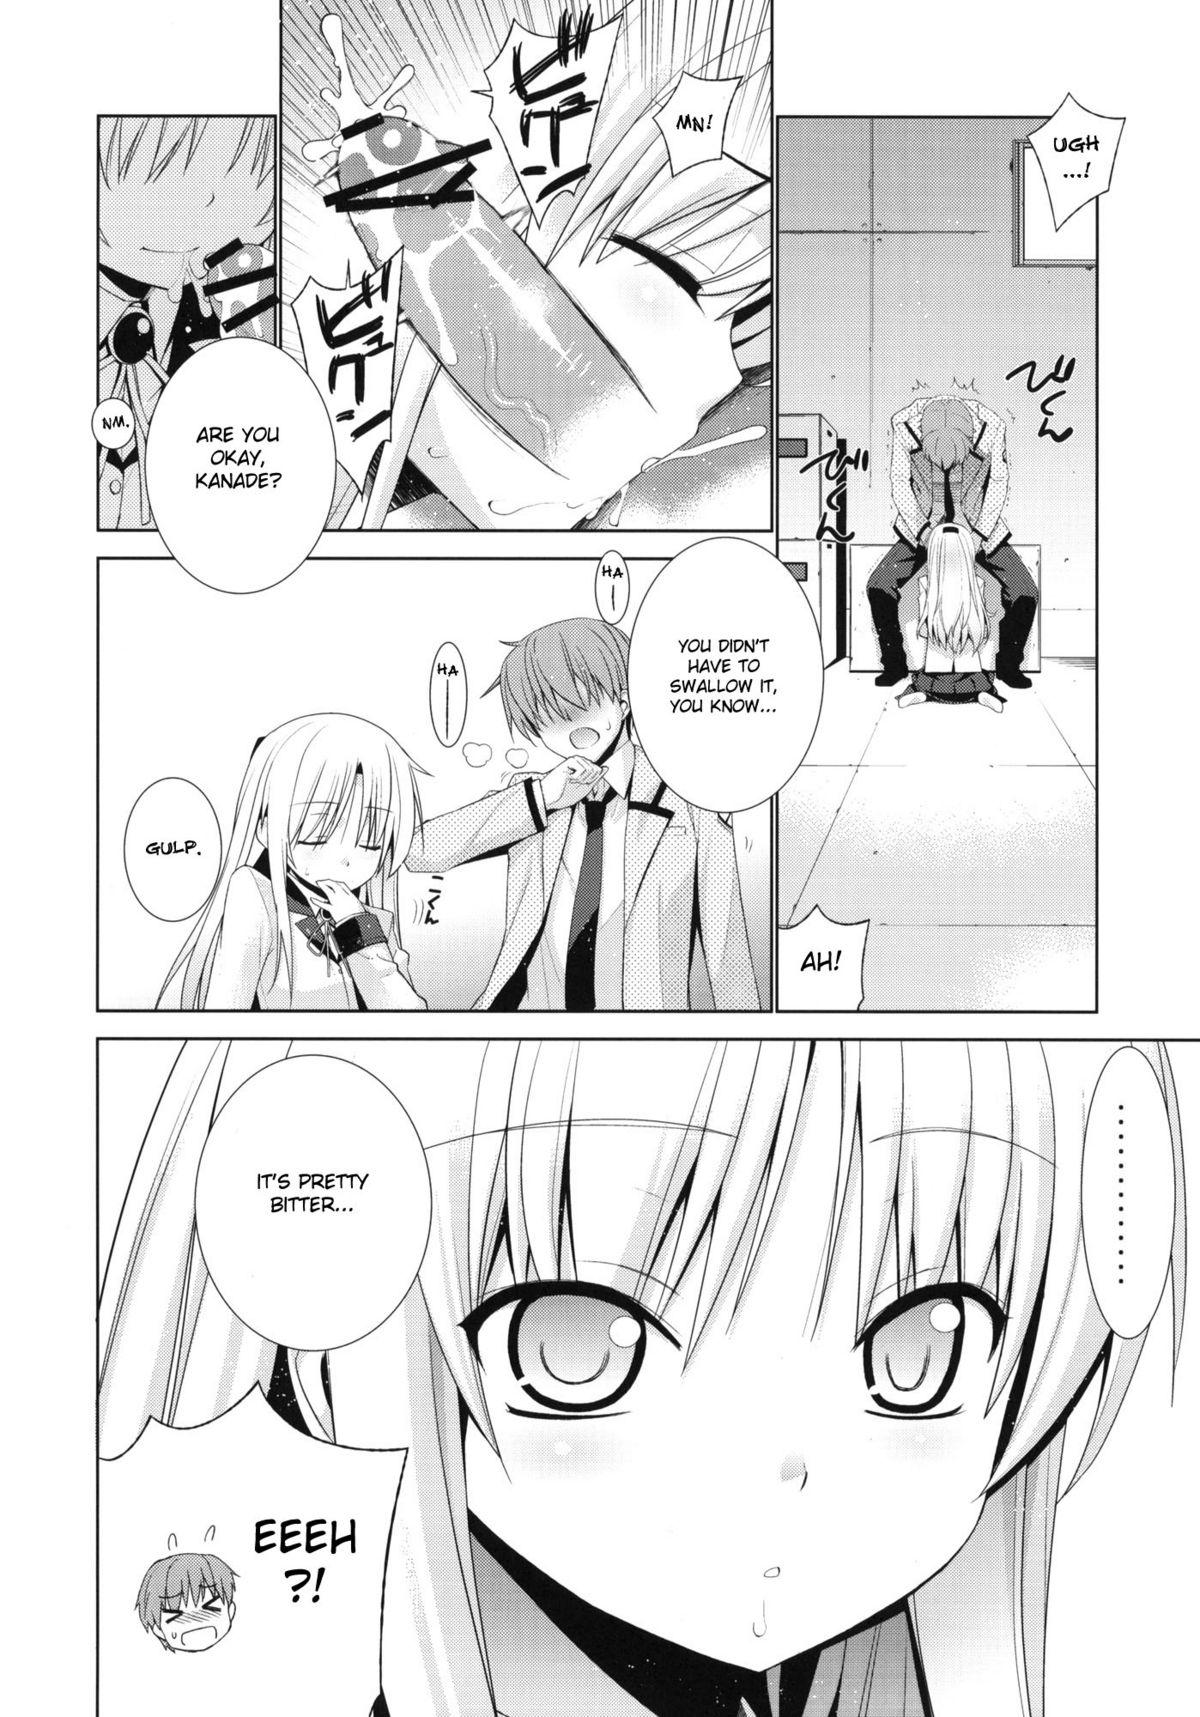 Boots Angel Days - Angel beats Pica - Page 5